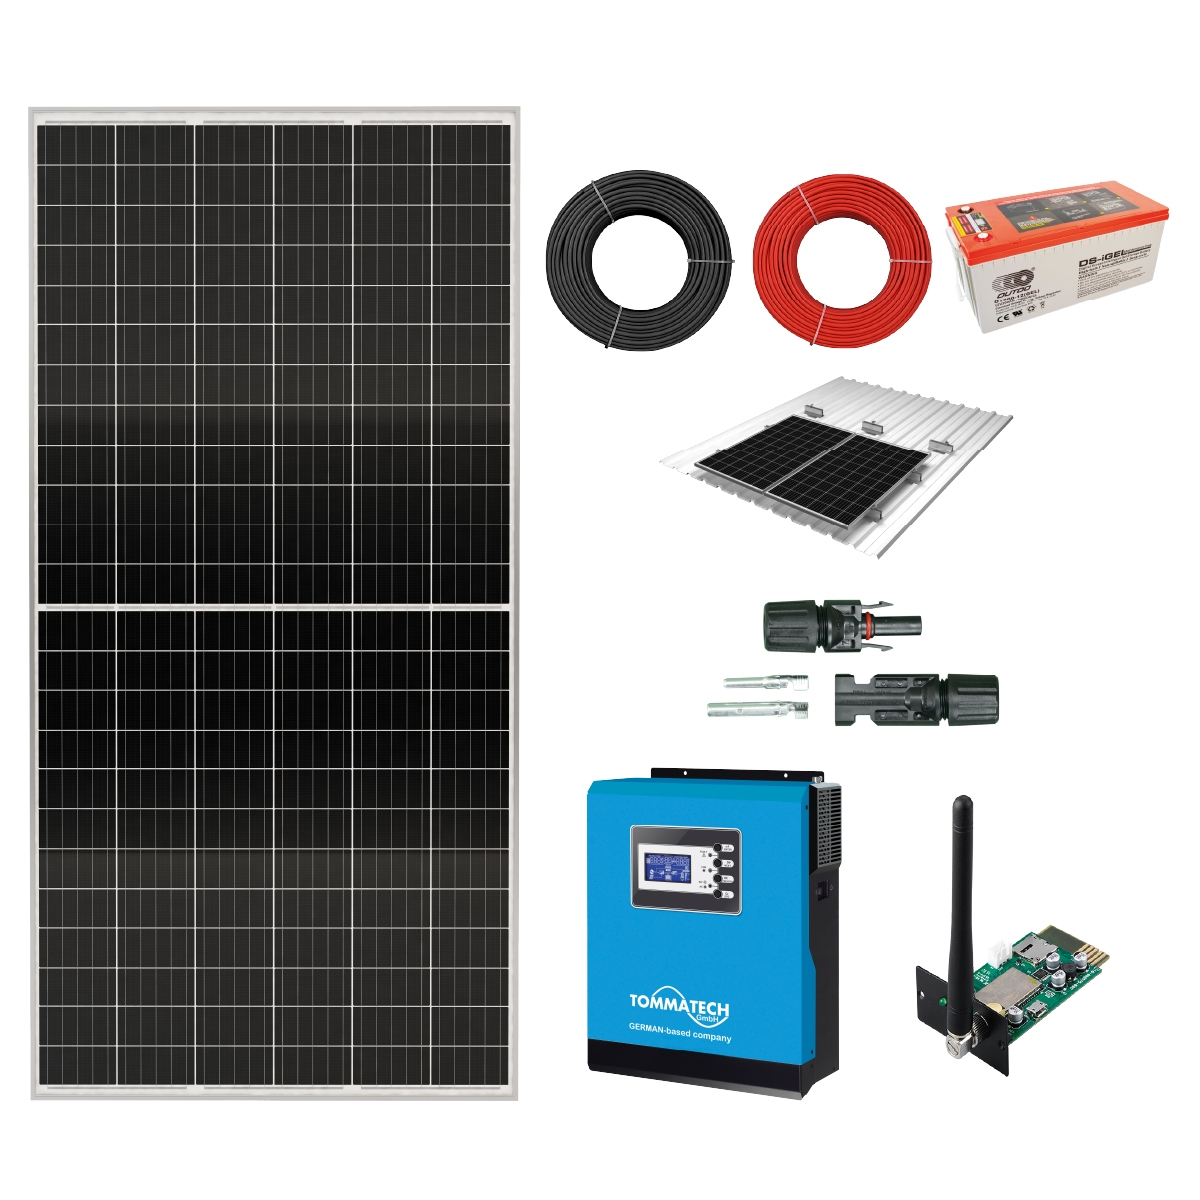 3kW / 910Wp / 9.6kWh / 1~ MPPT Solar Off-Grid Solution